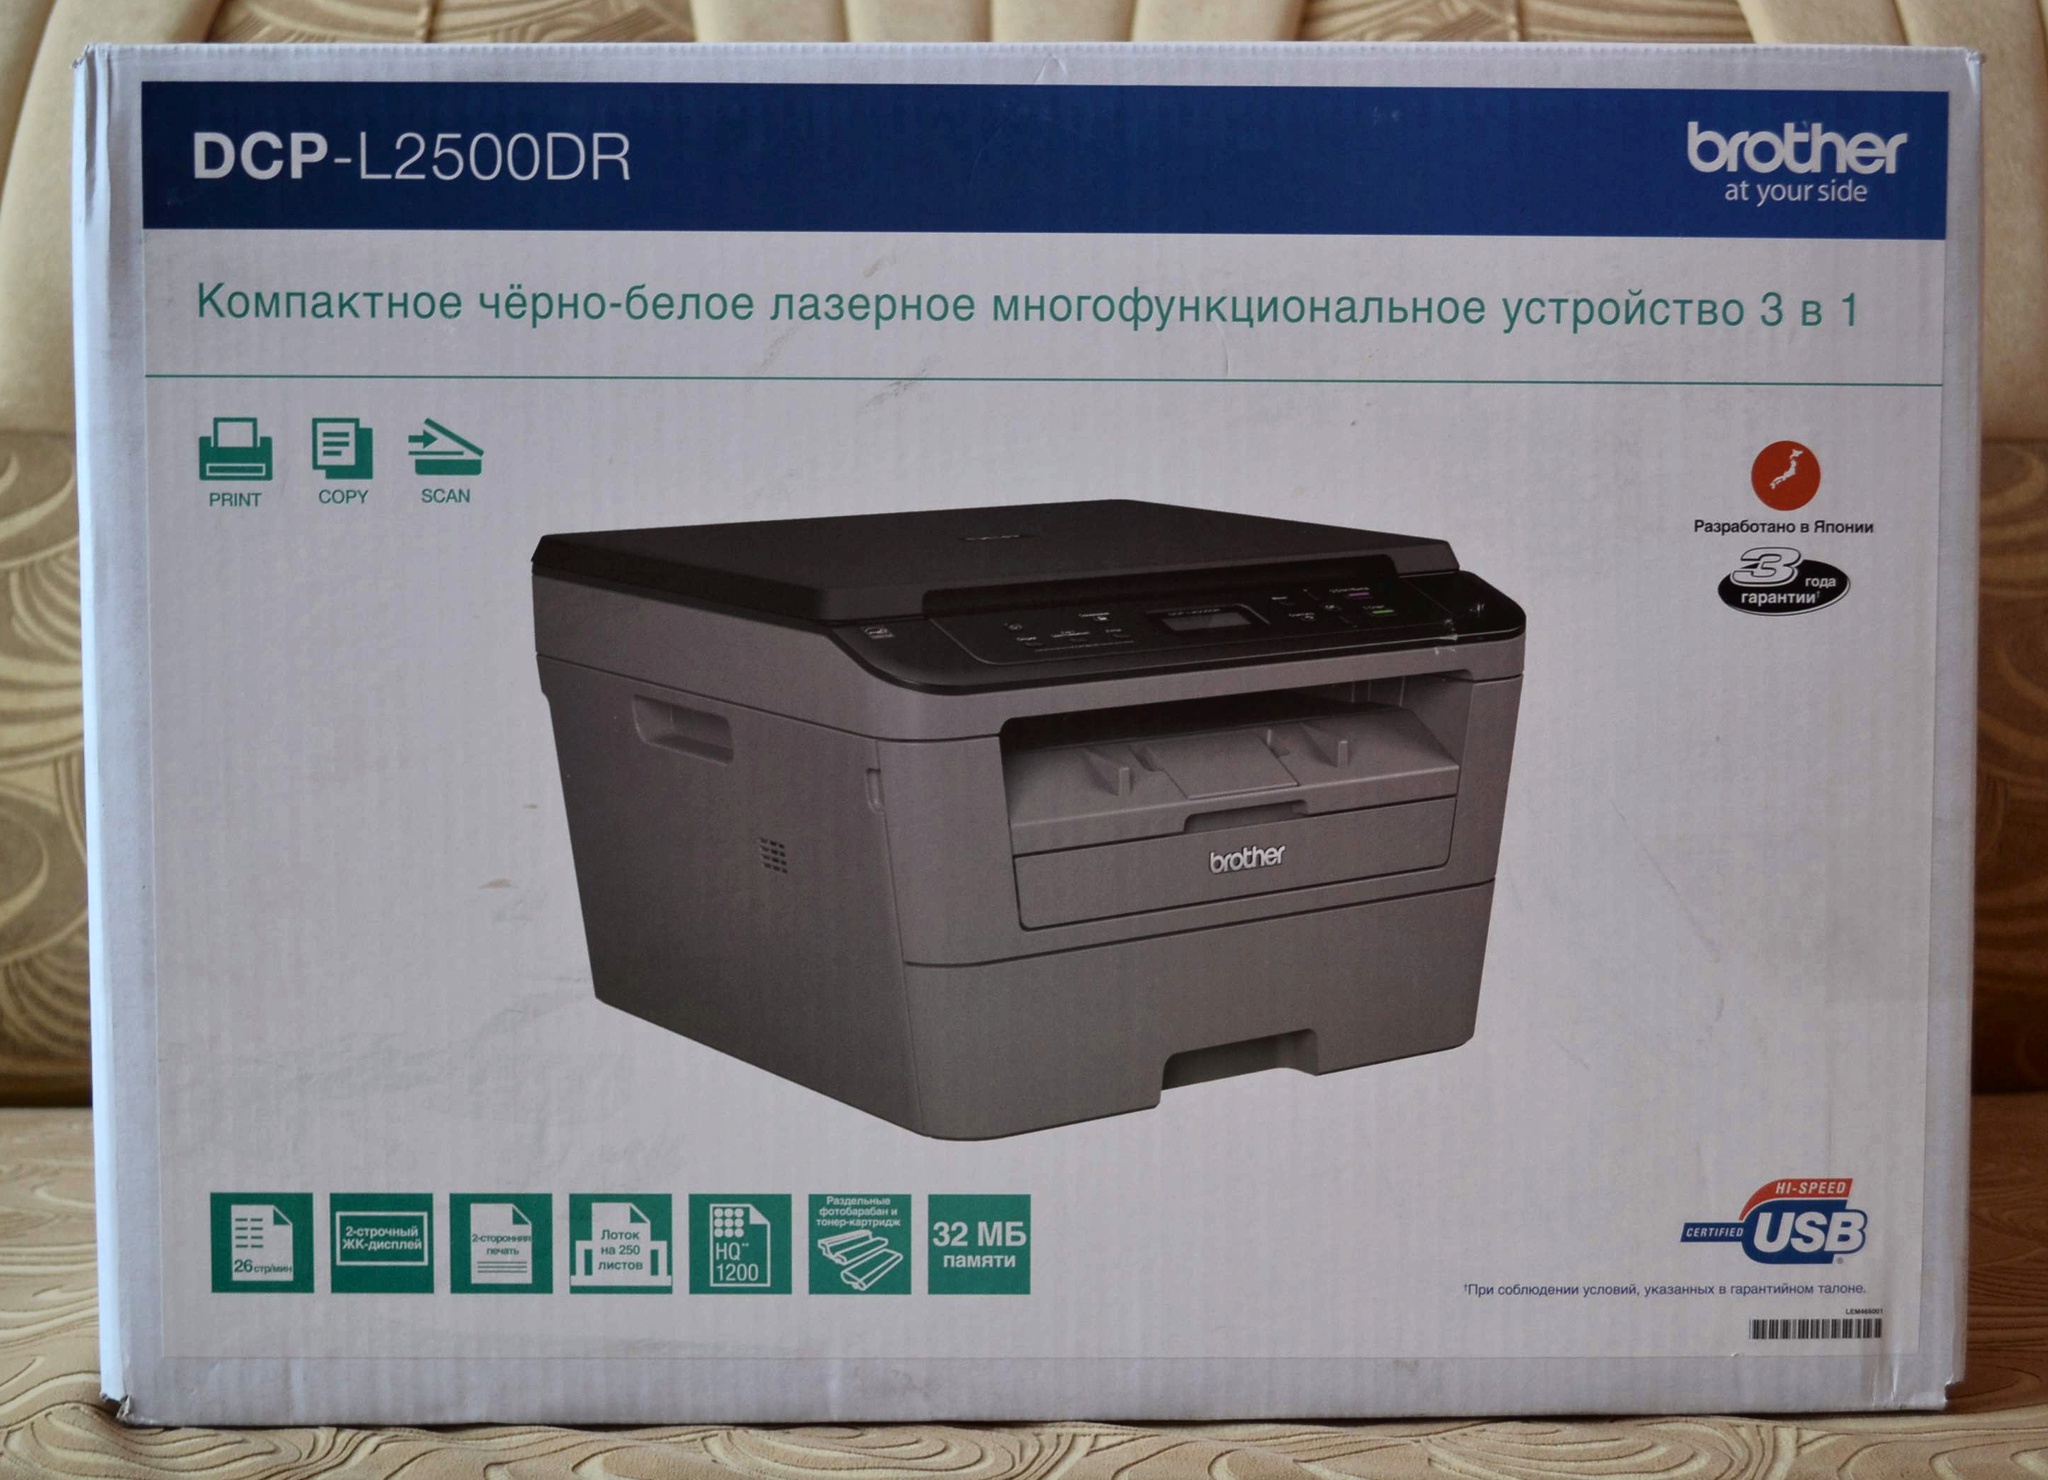 Brother dcp 2500dr. Принтер Бразер DCP l2500dr. МФУ brother DCP-l2500dr. МФУ Бразер 2500 Dr. Brother DCP 2500.